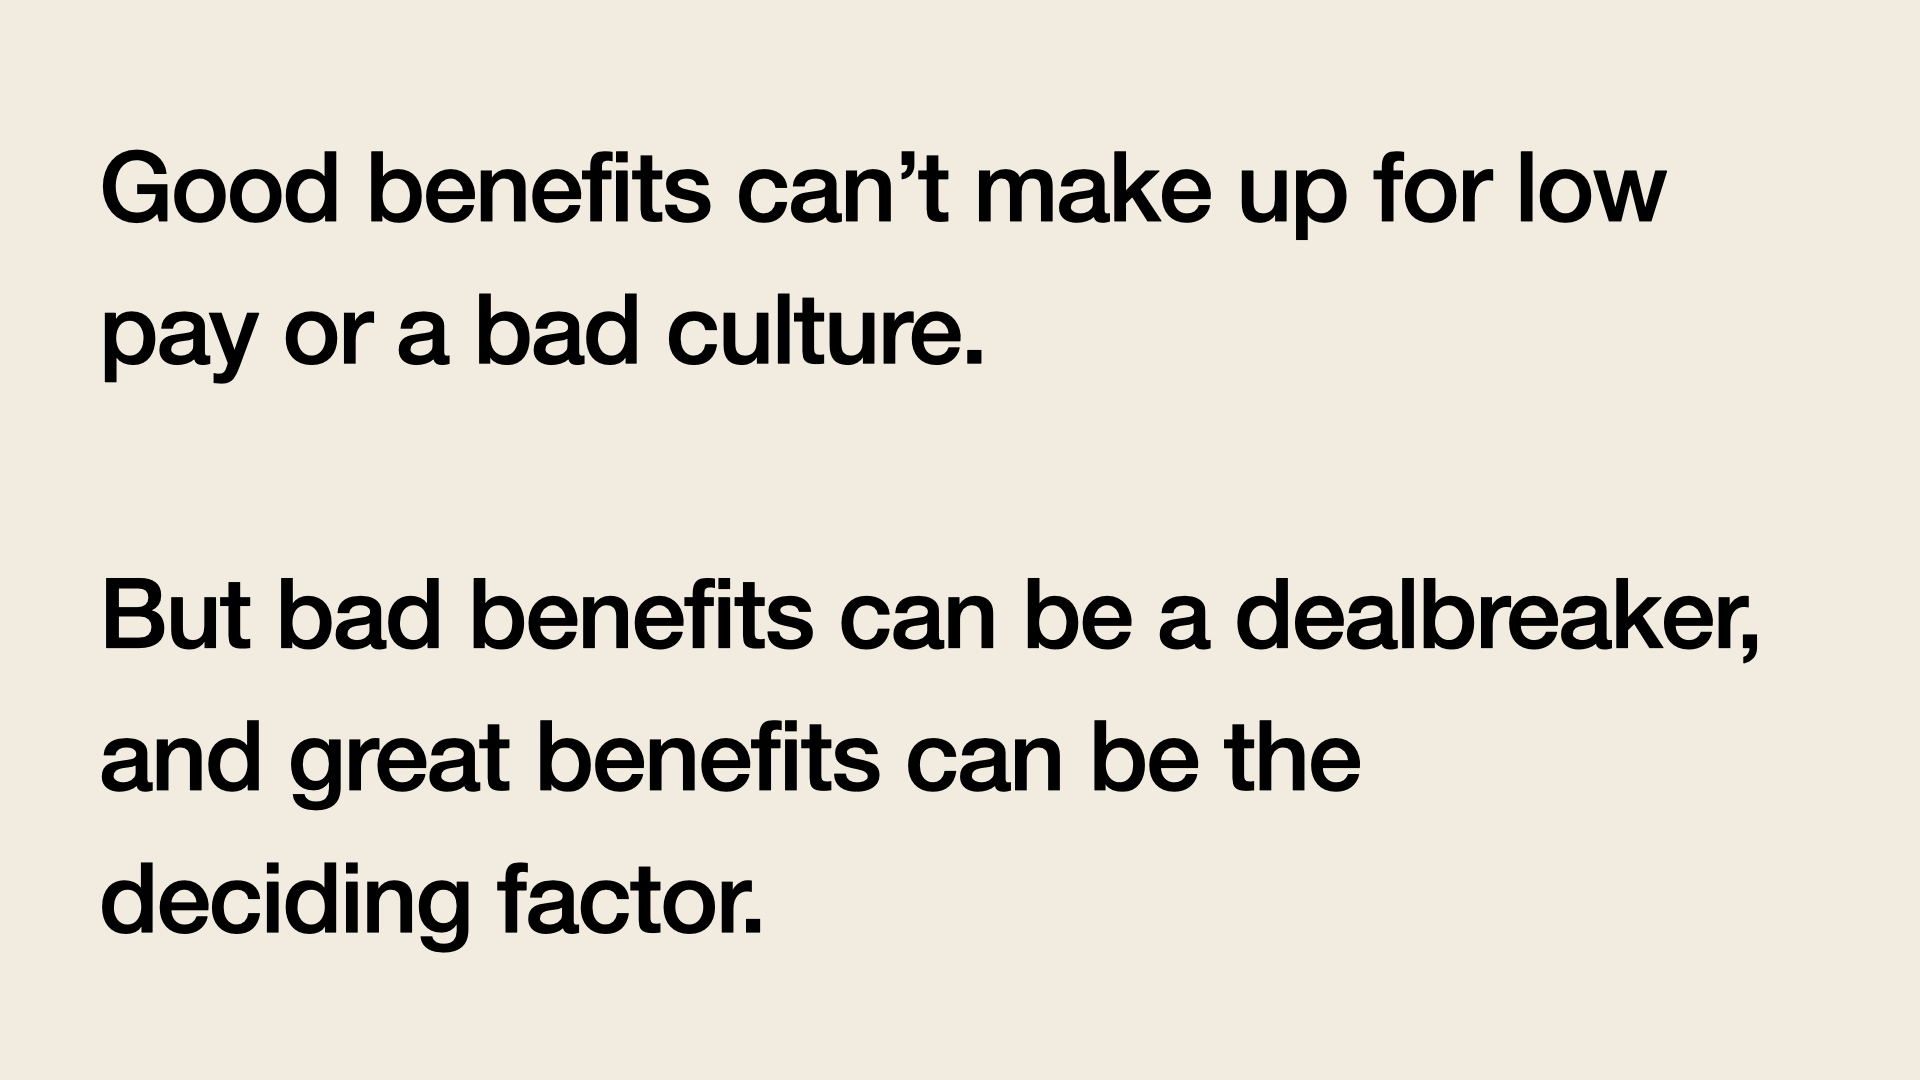 Good benefits can't make up for low pay or a bad culture. But bad benefits can be a dealbreaker, and great benefits can be the deciding factor.